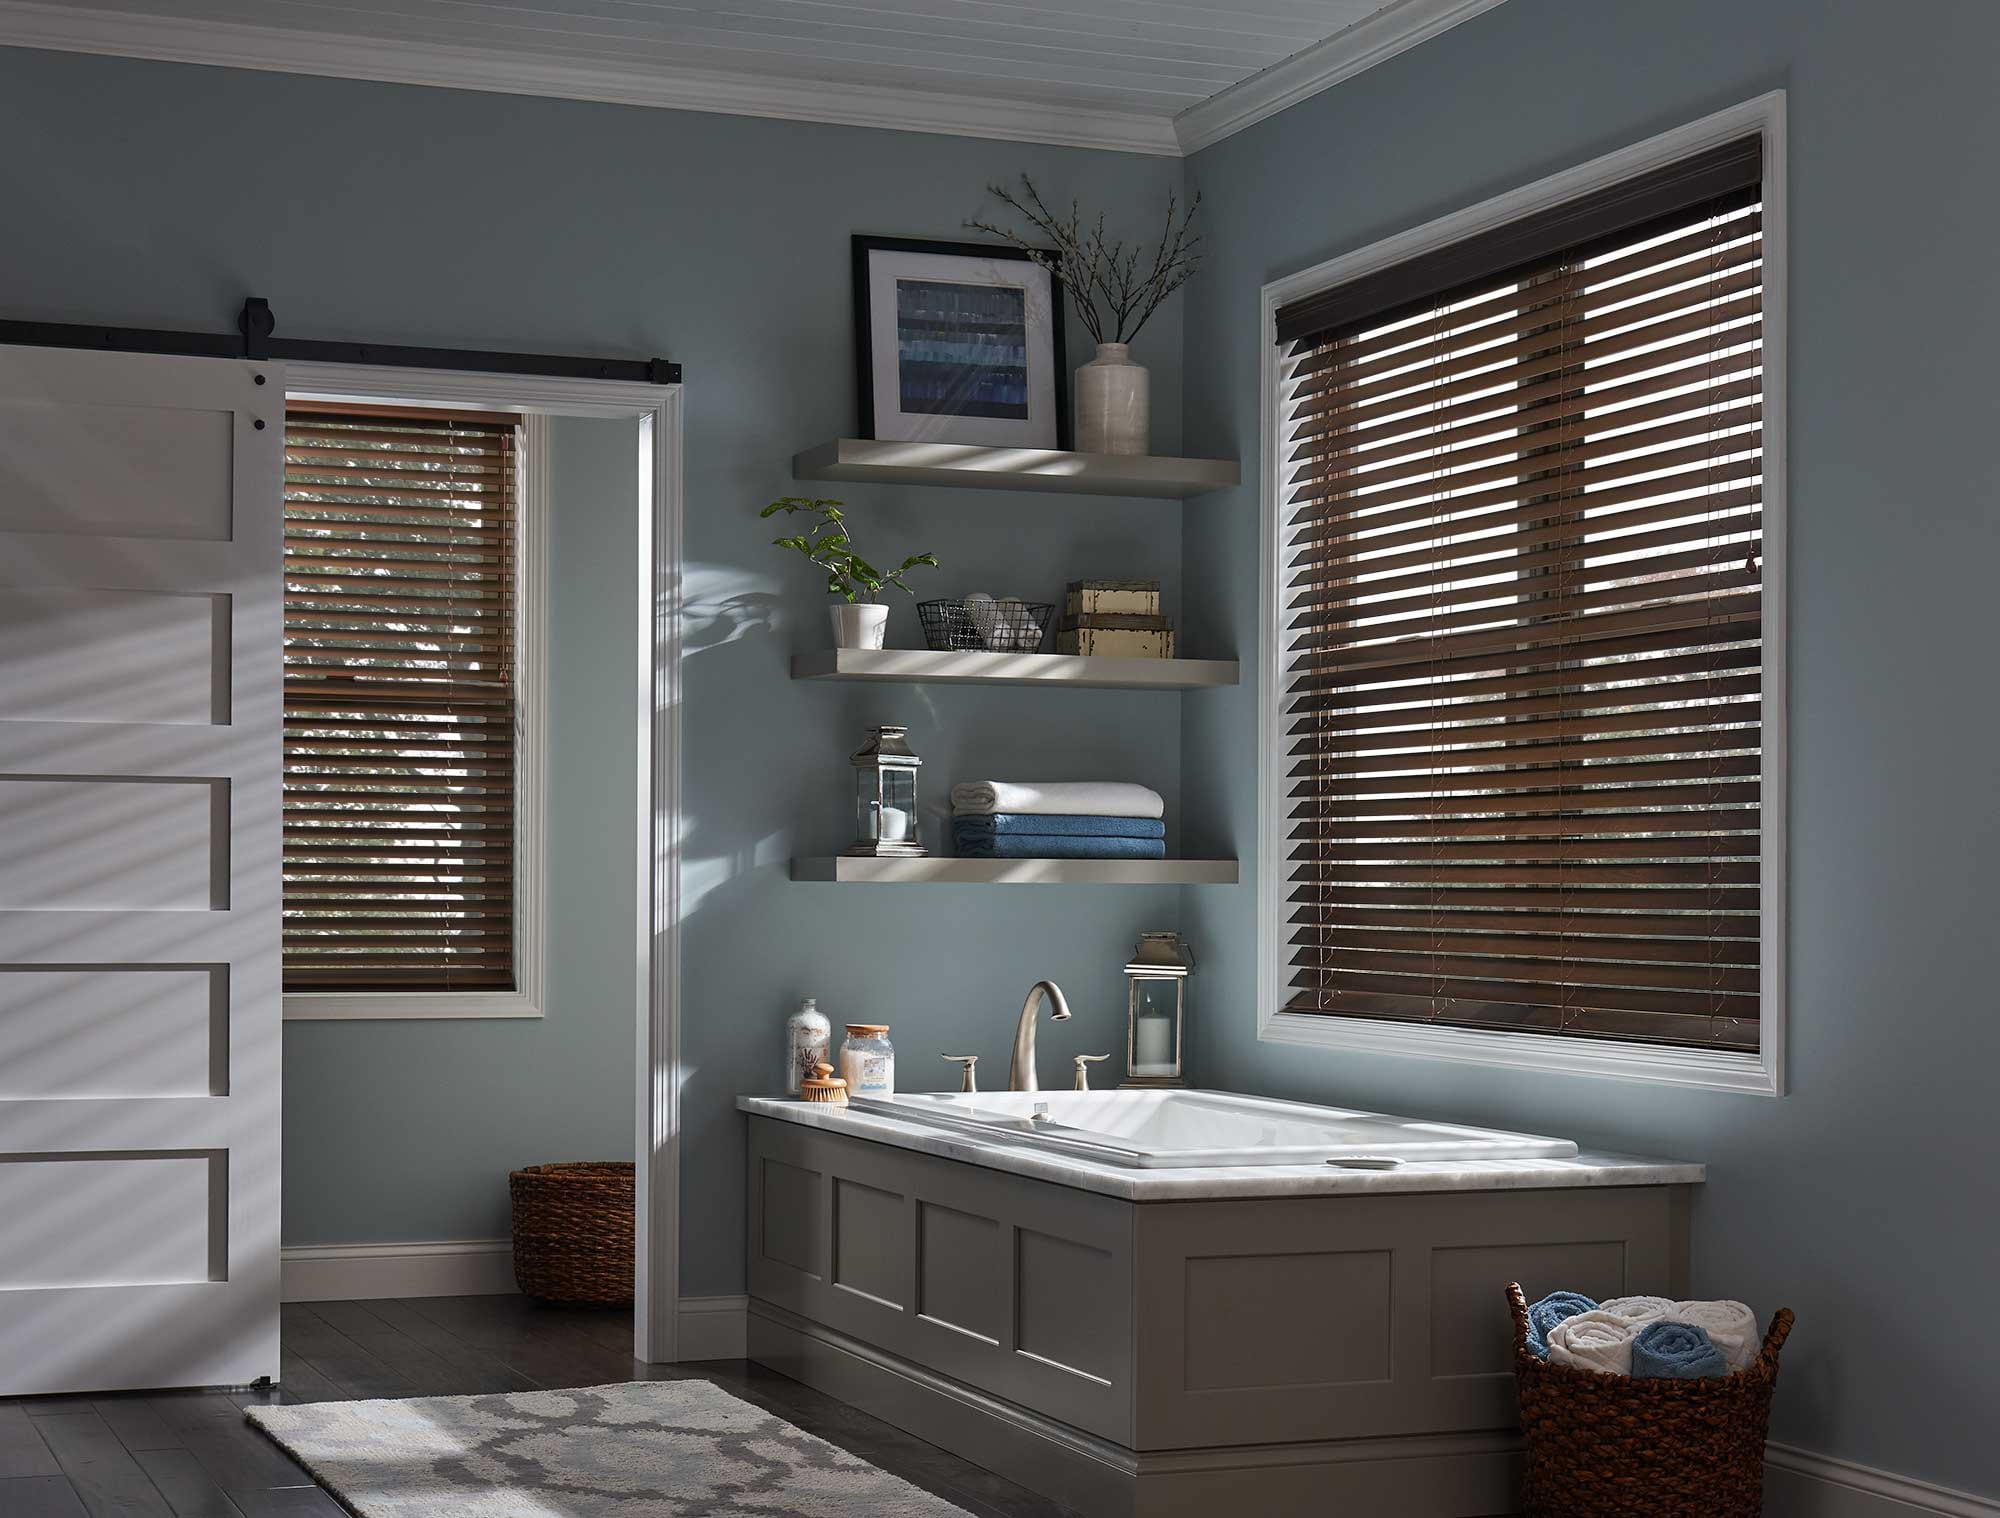 Stained wood blinds in a bathroom.